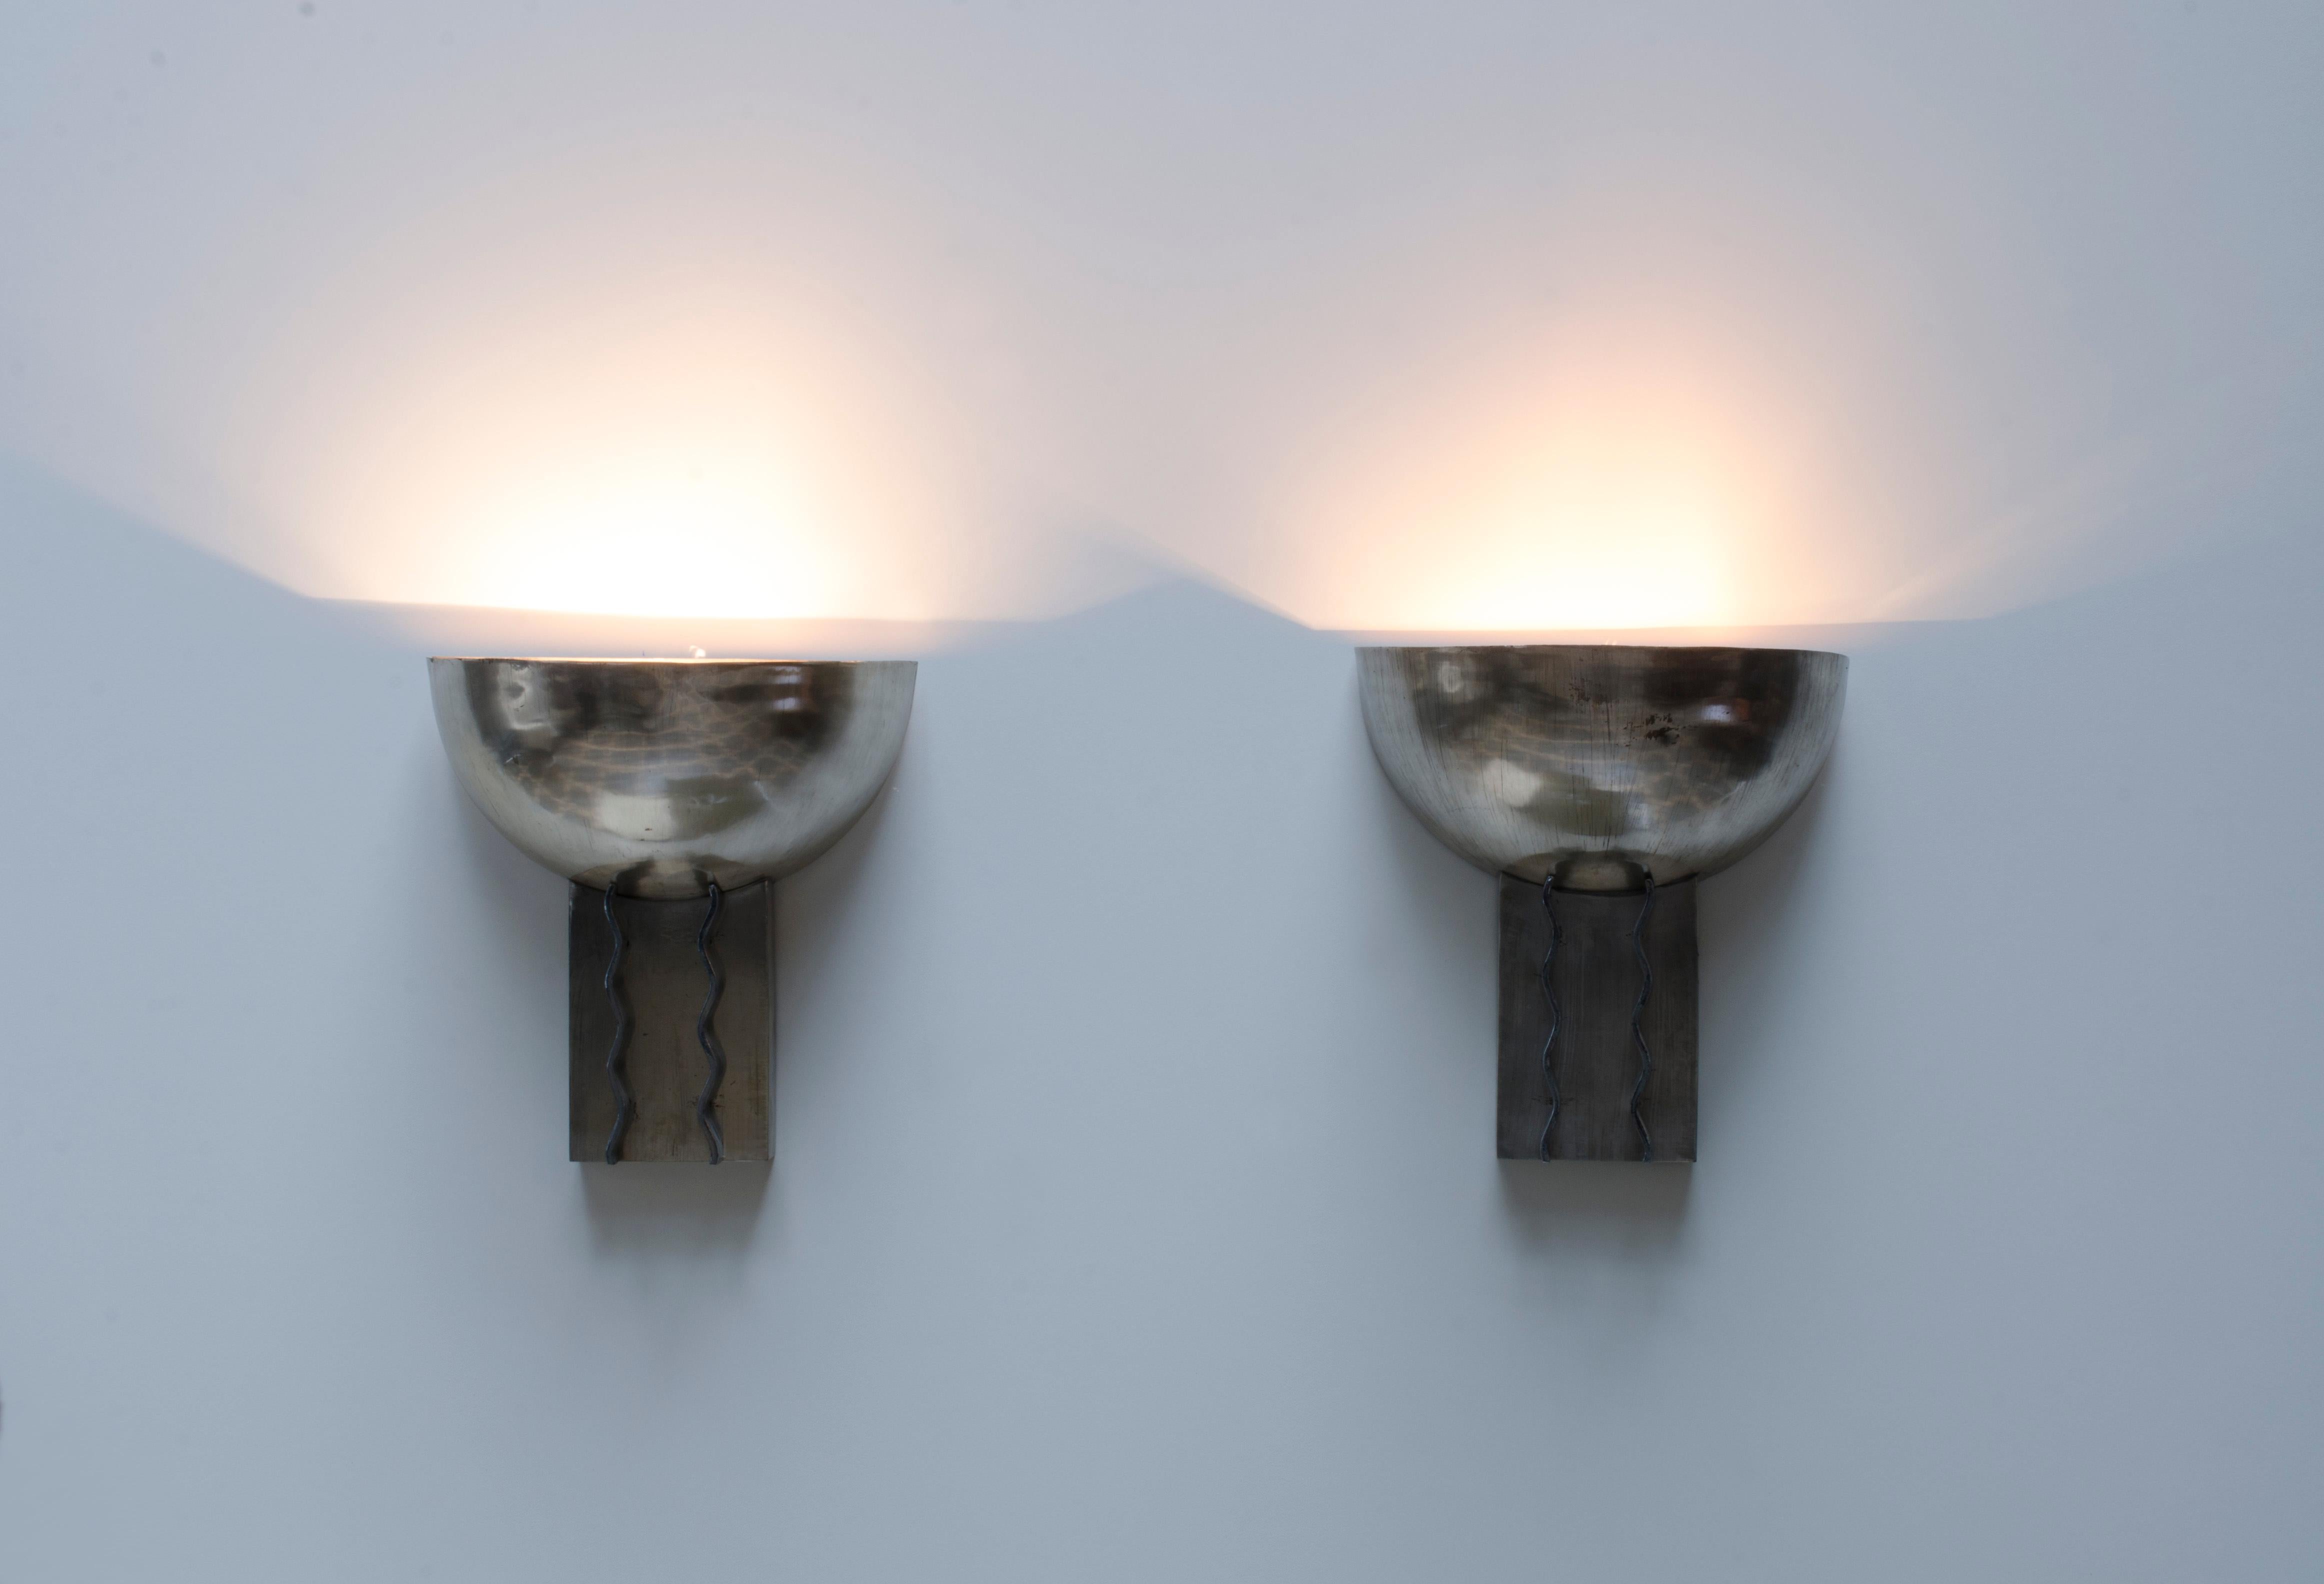 Pair of silver-plated bronze wall lamps. Attributed to Maison Desny Paris (1927-1933). By Clement Nauny (1900-1968).

France, Circa 1930.